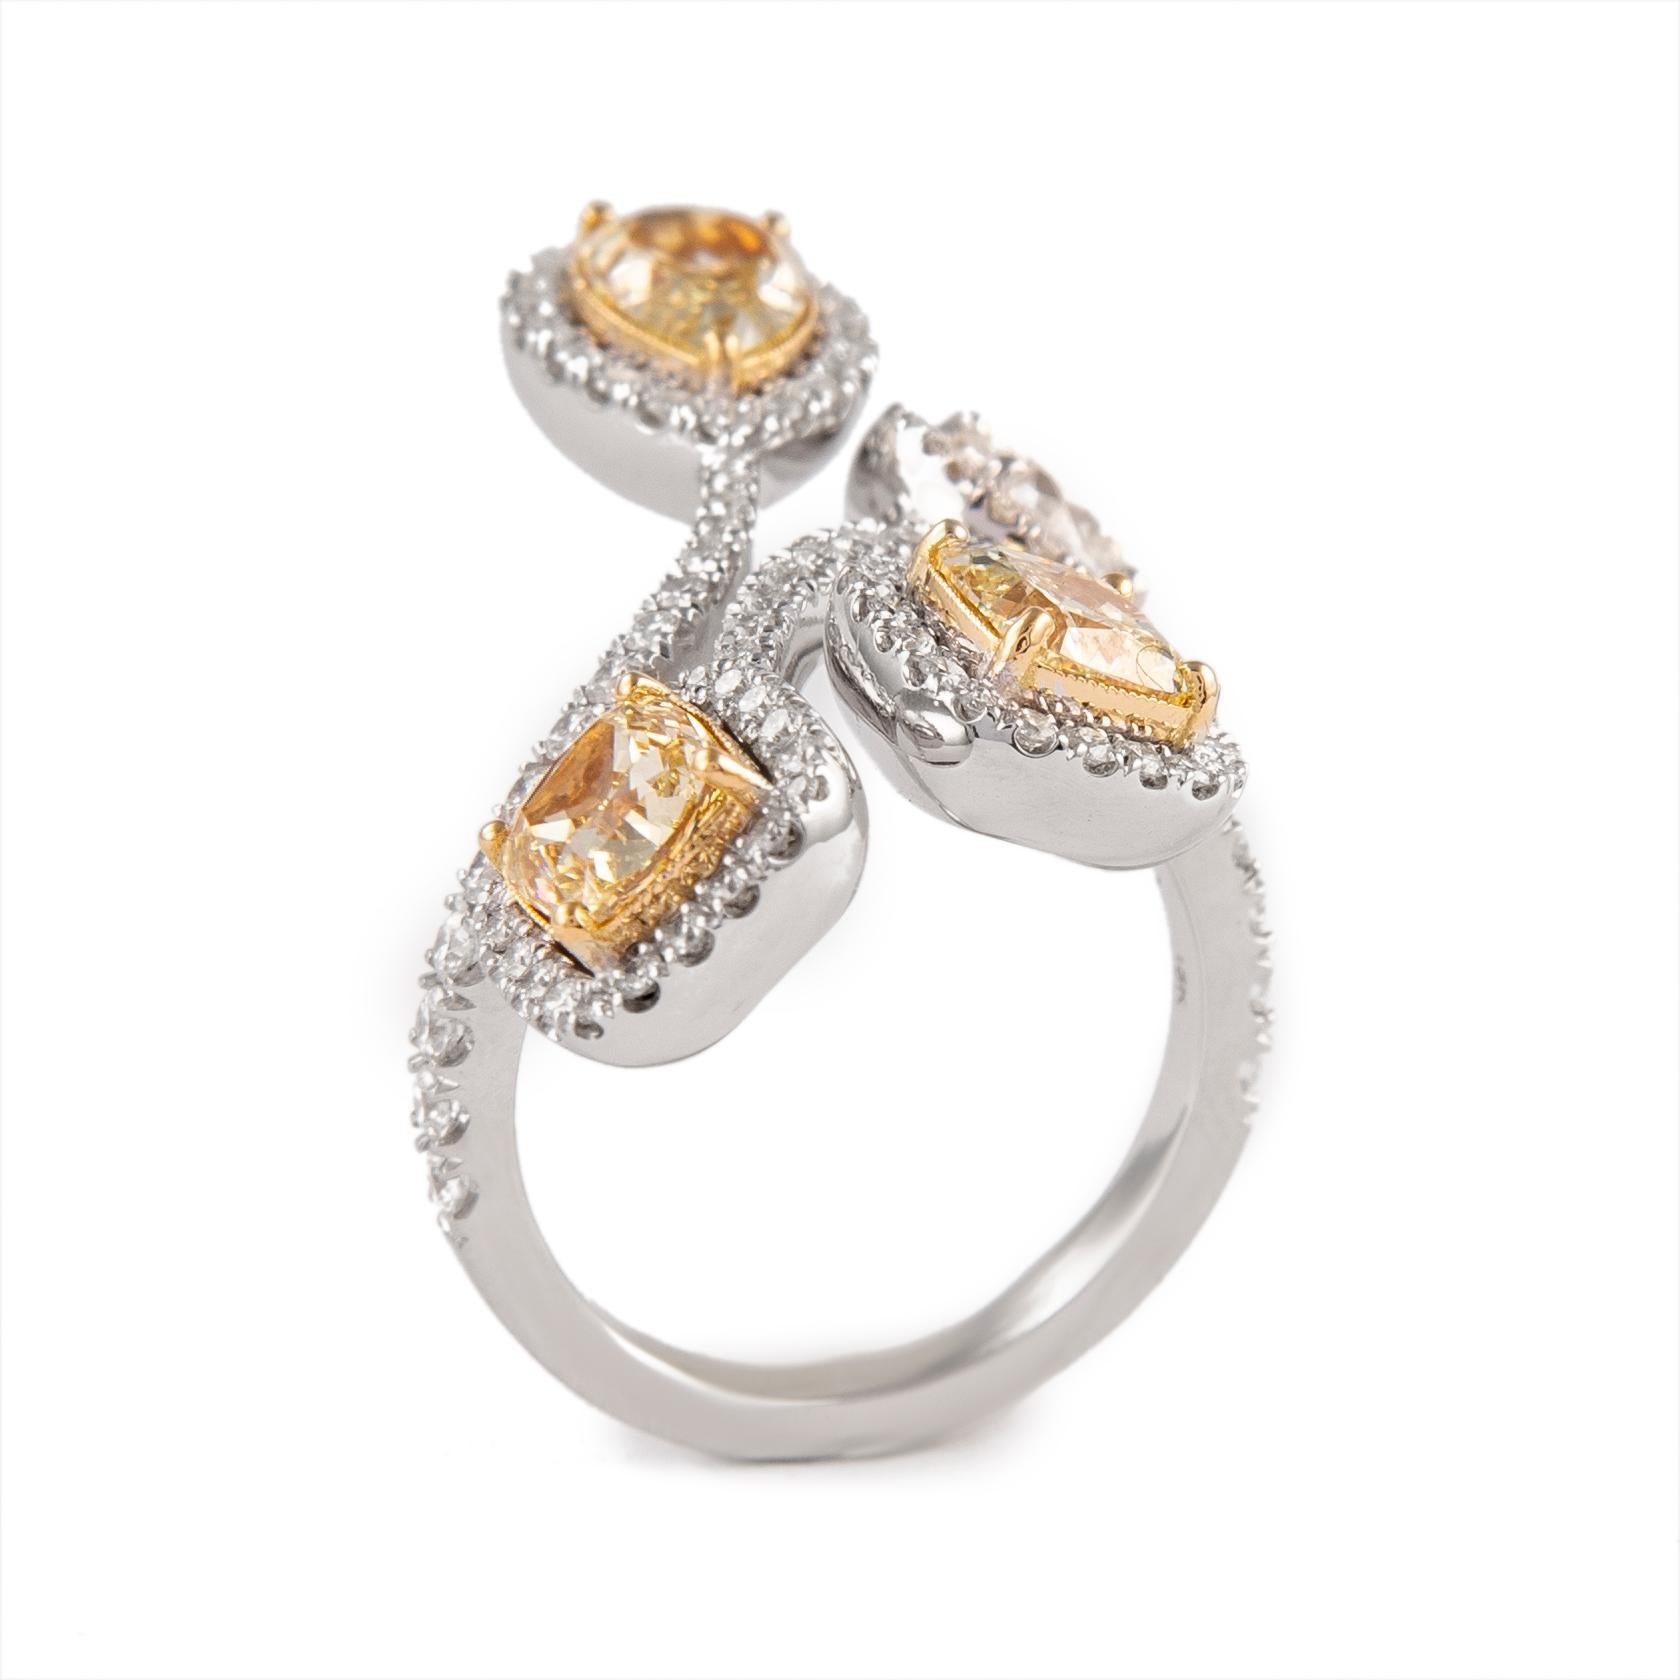 Alexander GIA Certified 3.06ct Fancy Yellow Diamond Bypass Ring 18k Gold For Sale 2